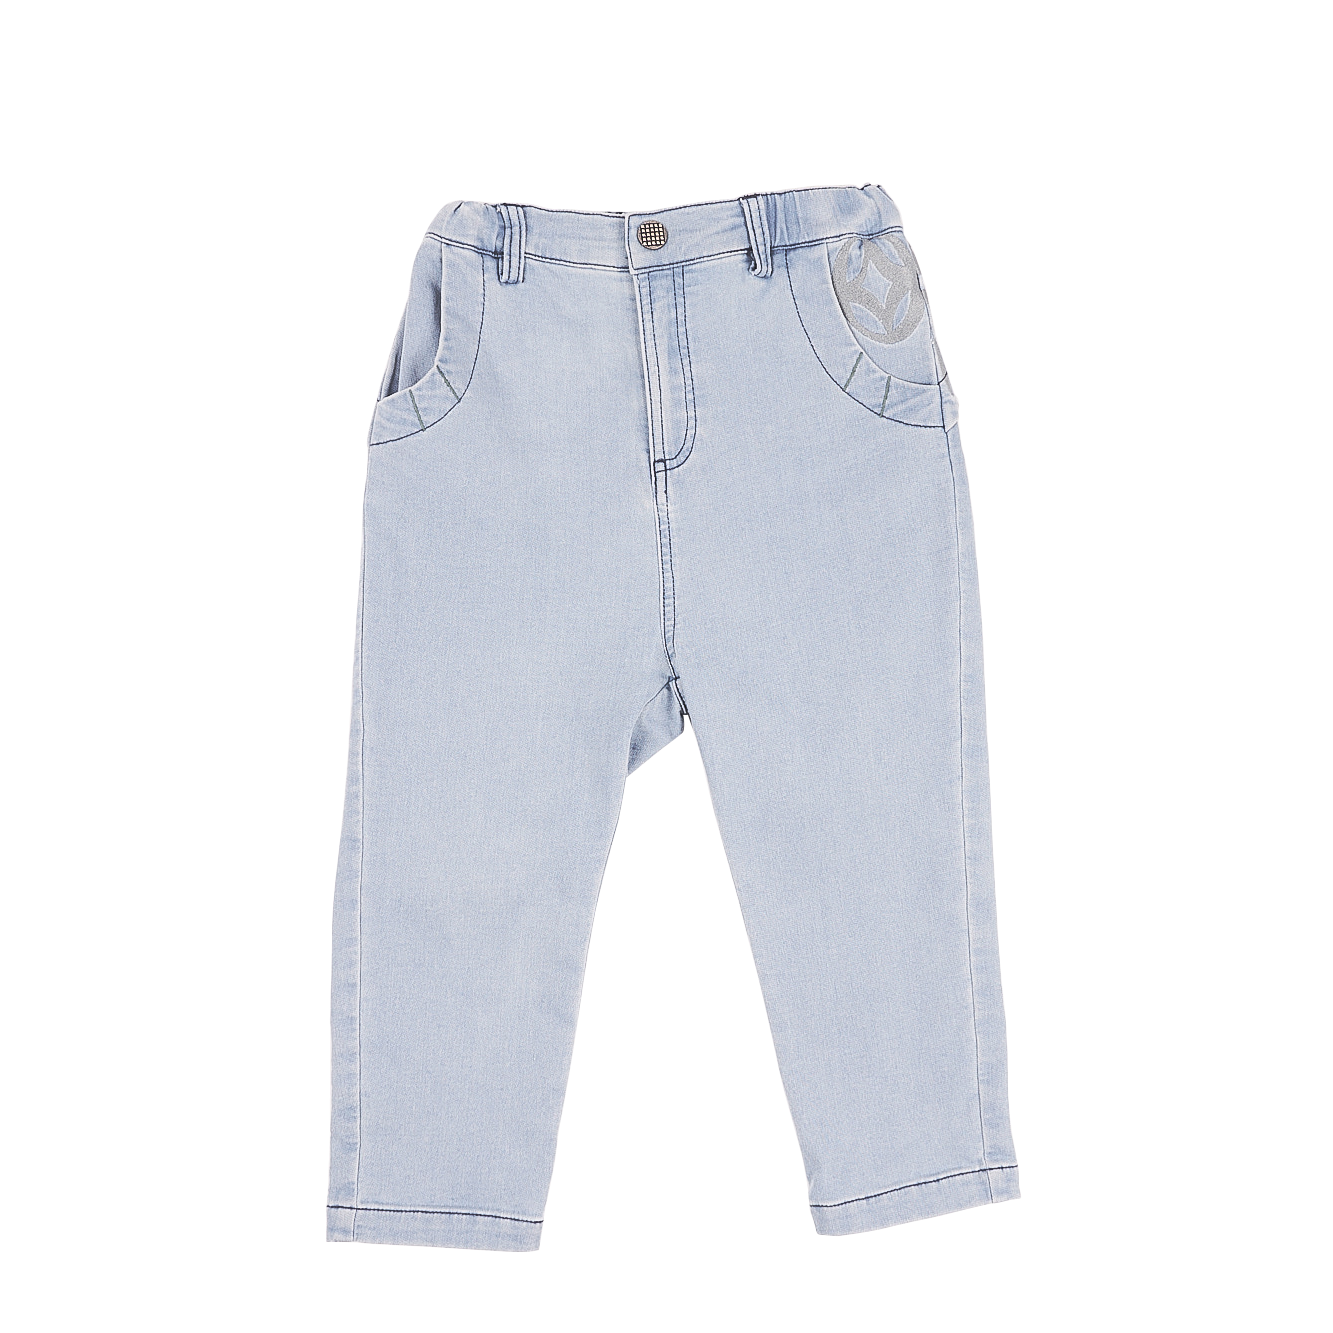 Denim kids trousers with good fortune and coin motif